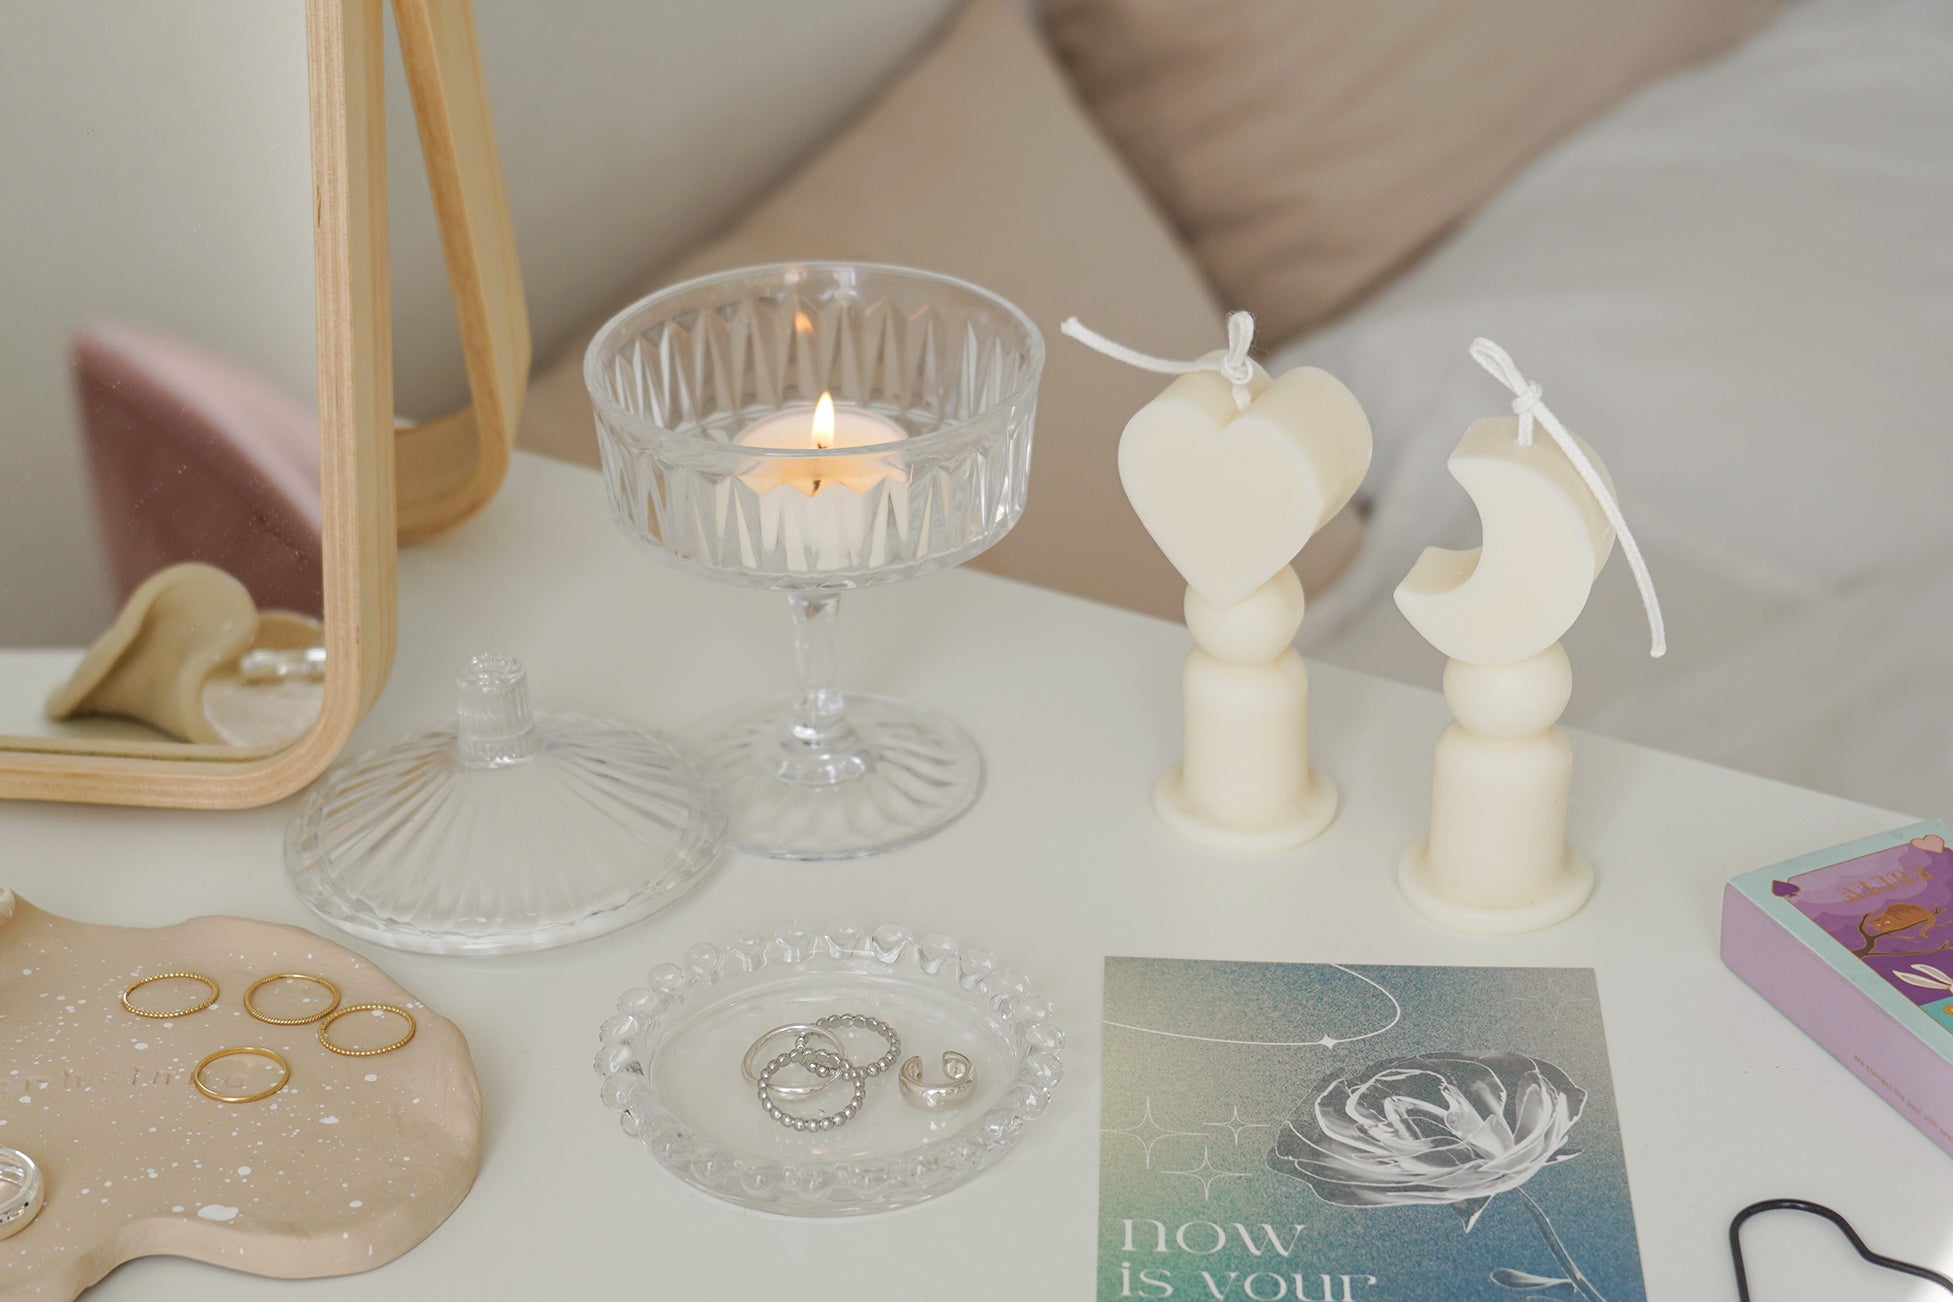 Heart shape candle, crescent moon shape candles, a lit tealight candle in a glass coupe, blue postcard, match box, black heart shape wick dipper, and silver rings on clear beaded tray are place on white drawer. The arrangement exudes minimal aesthetic dreamy vibes